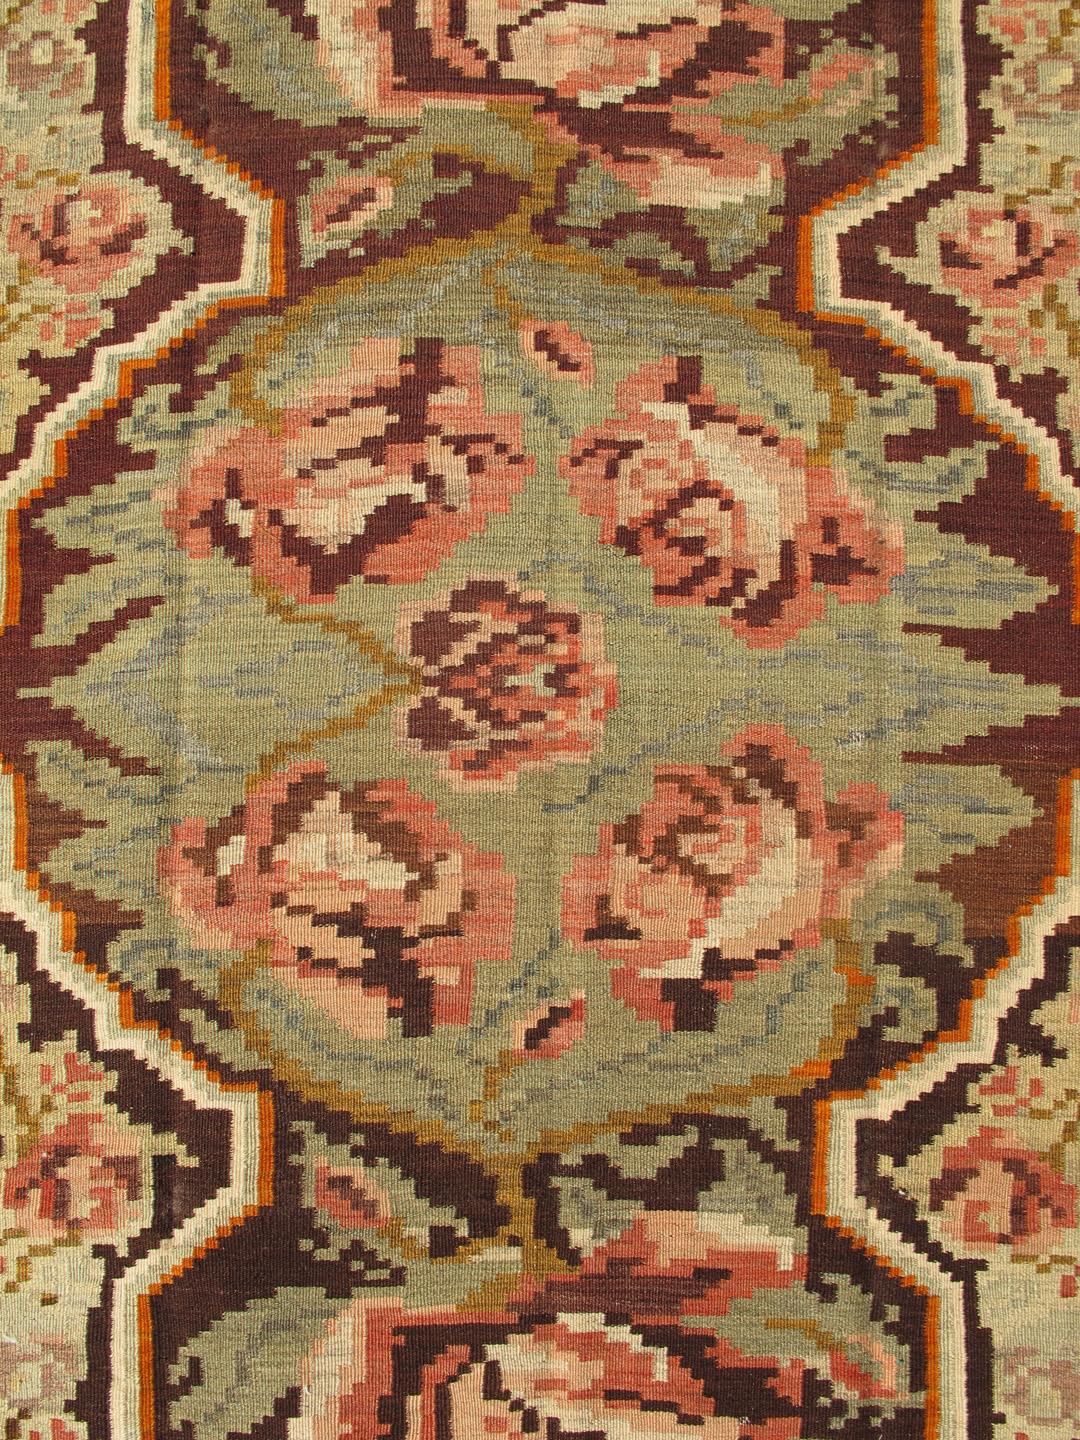 Vintage French pattern Kilim in green, brown and multi colors, Kb-H-401-14, Vintage Turkish Kilim rug
handmade vintage Kilim rug with a beautiful central medallion and vining floral design in green, brown and multi-colors.
Measures: 5' x 8'4.
   